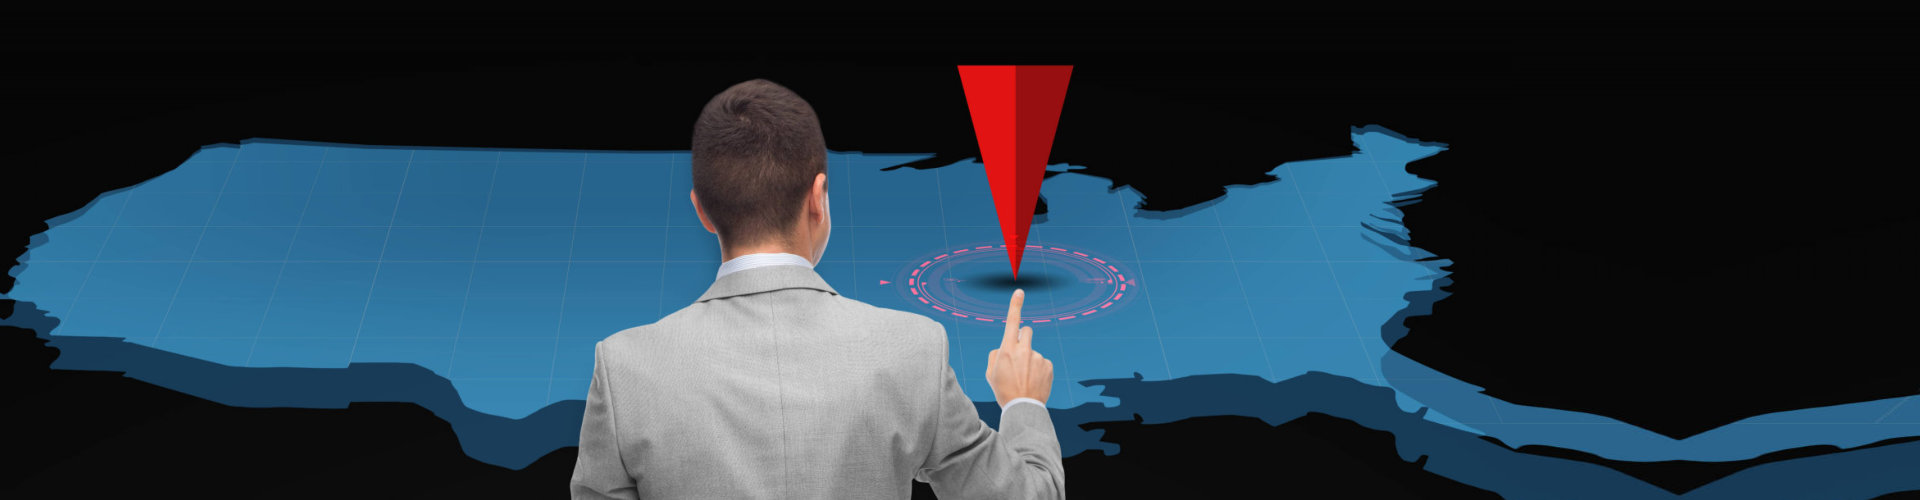 man pinpointing a location